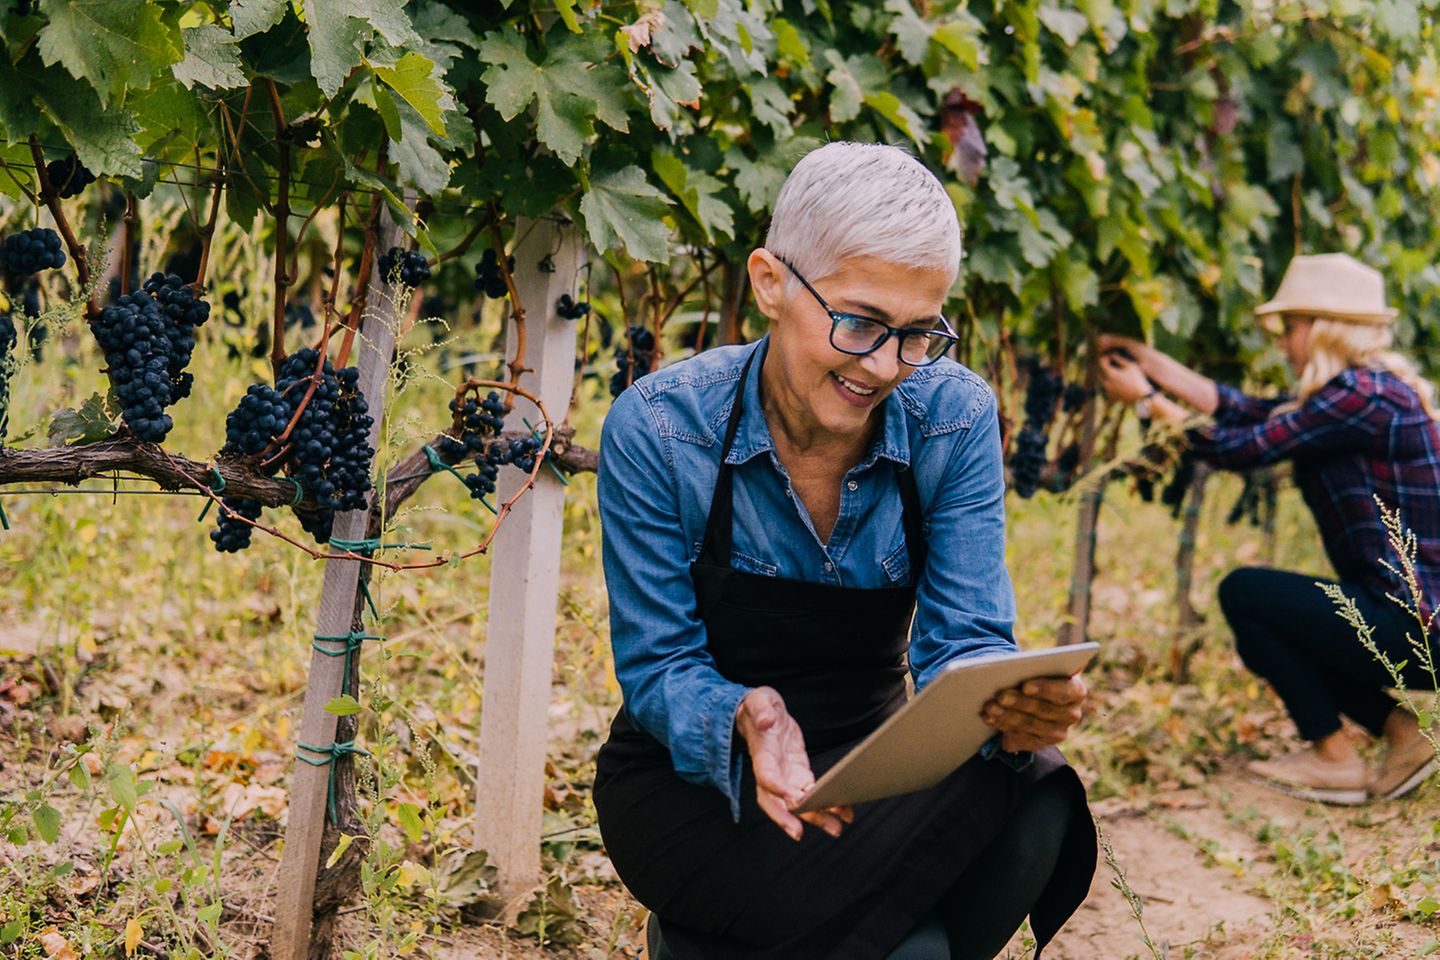 Middleaged woman sitting in a vineyard with a tablet in her hand